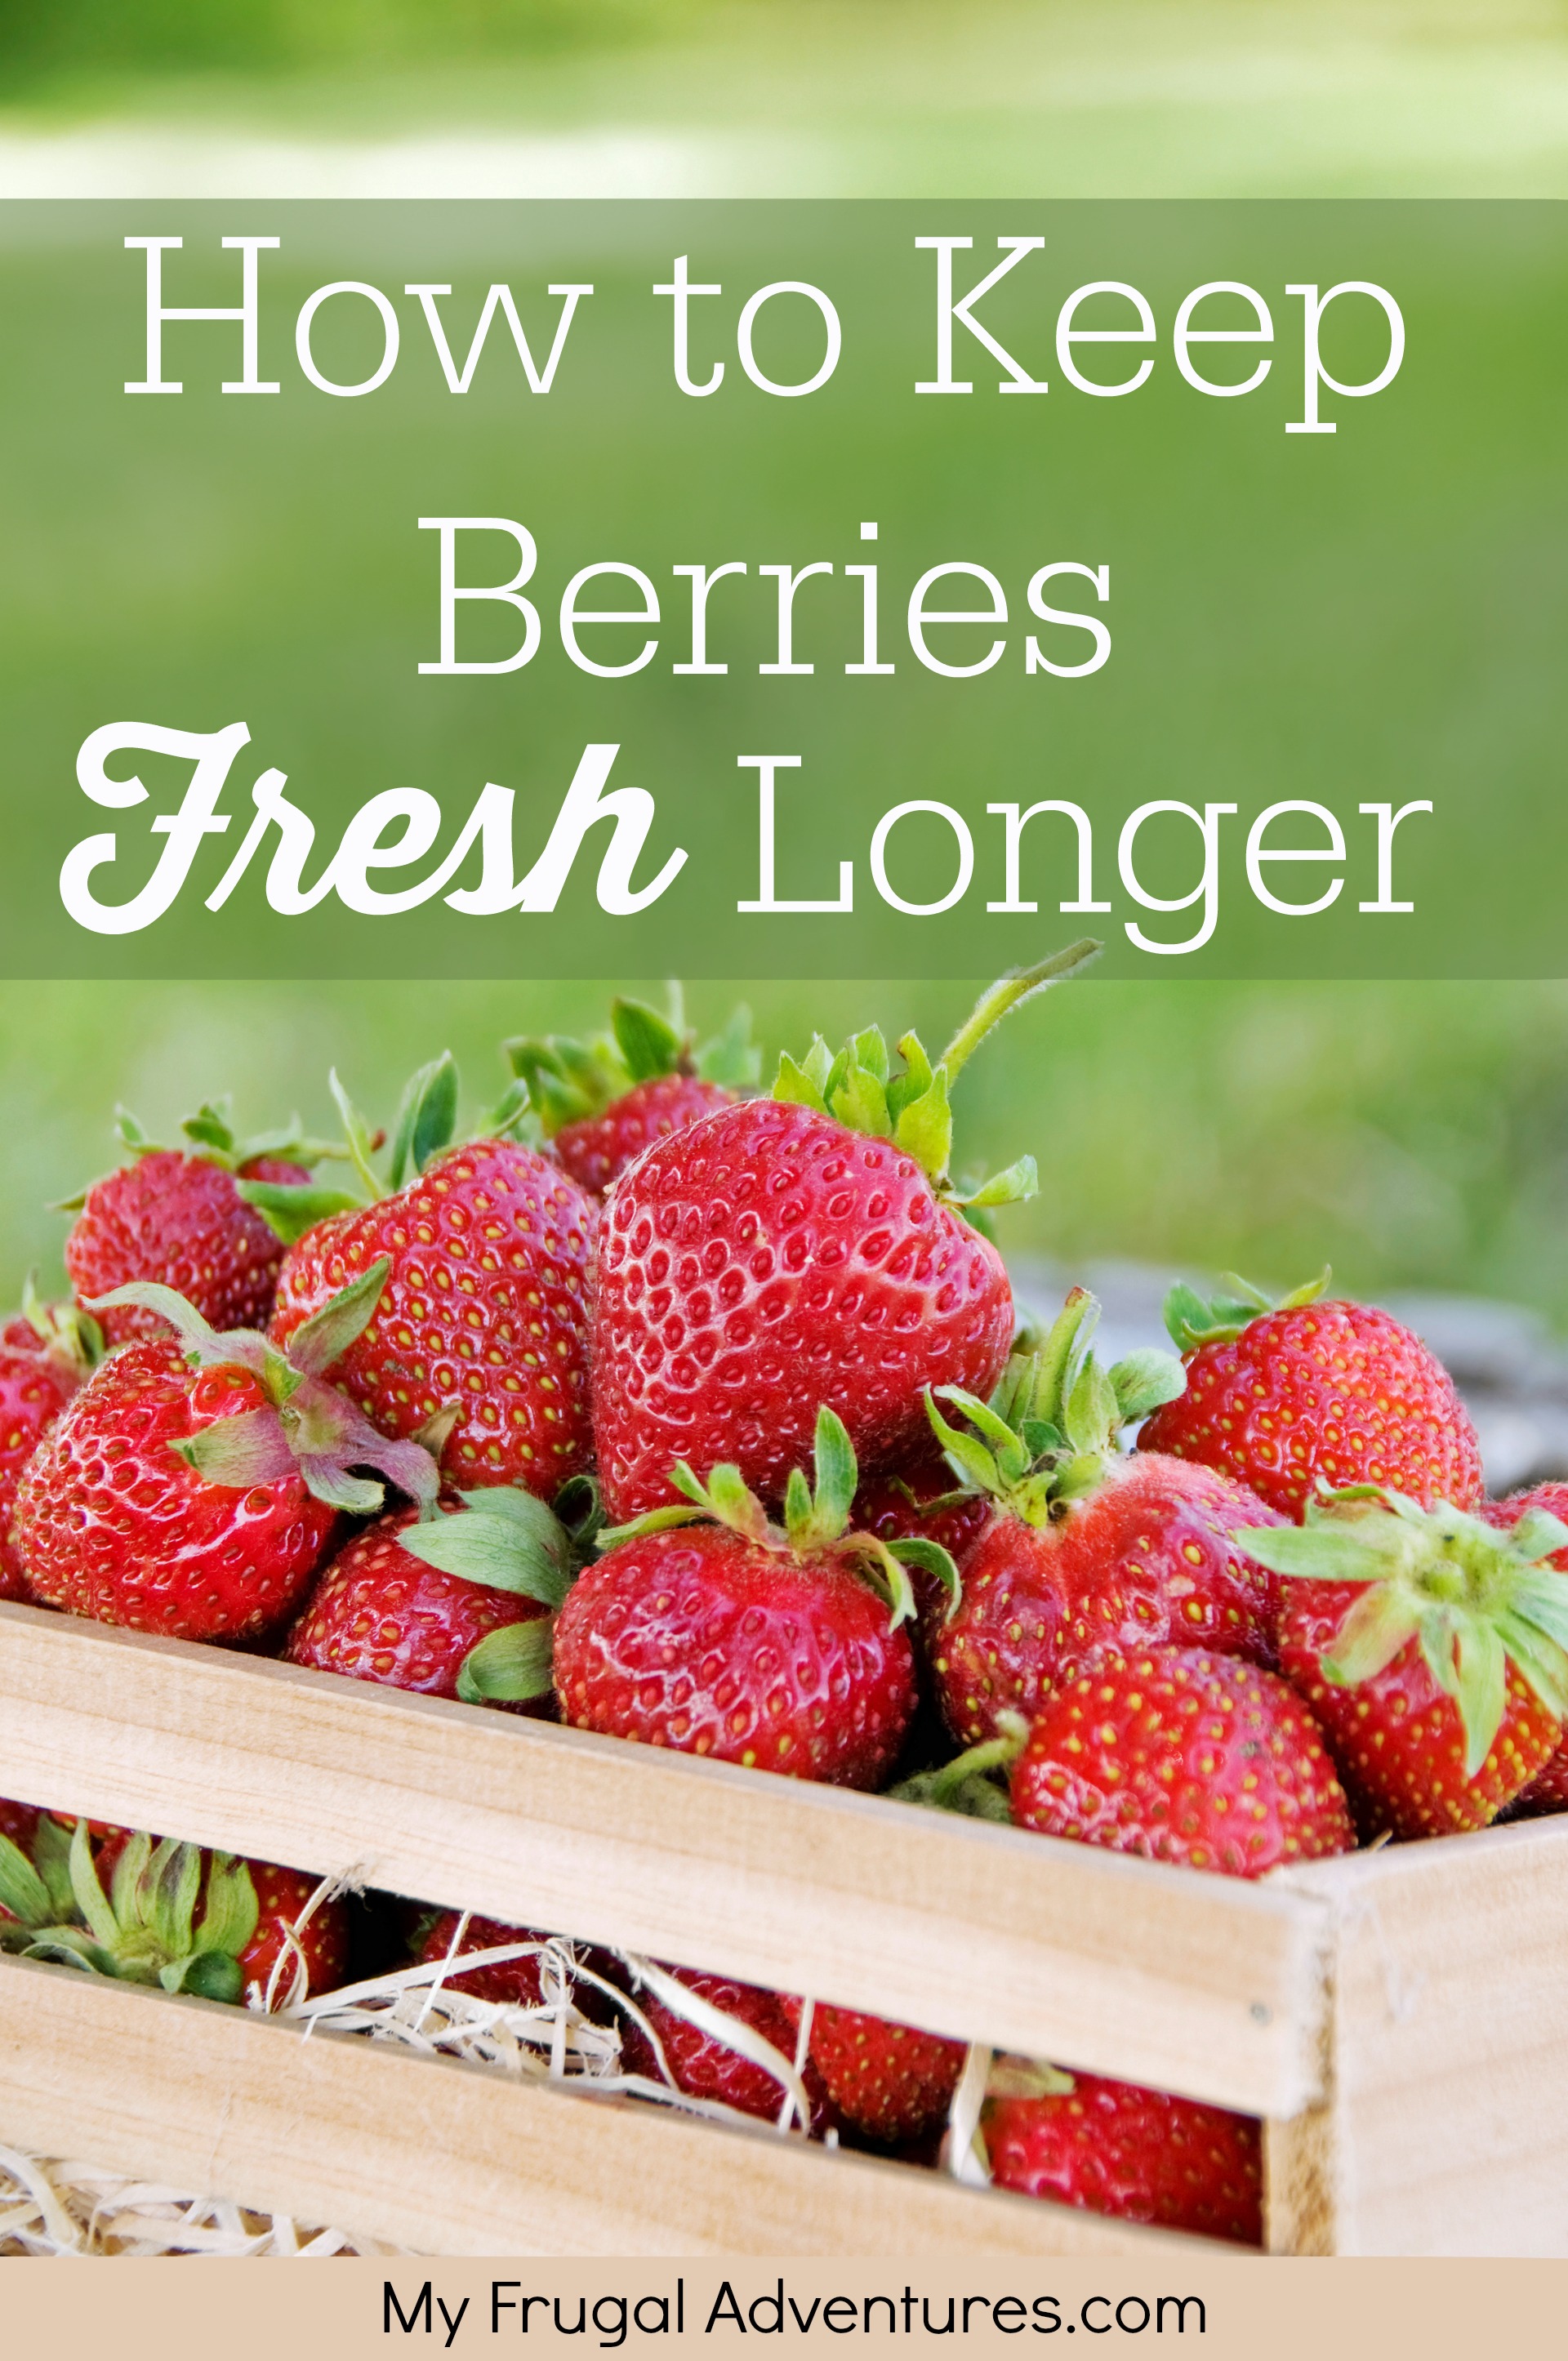 How to Store Strawberries, Blueberries, and Blackberries so They Stay  Fresher Longer